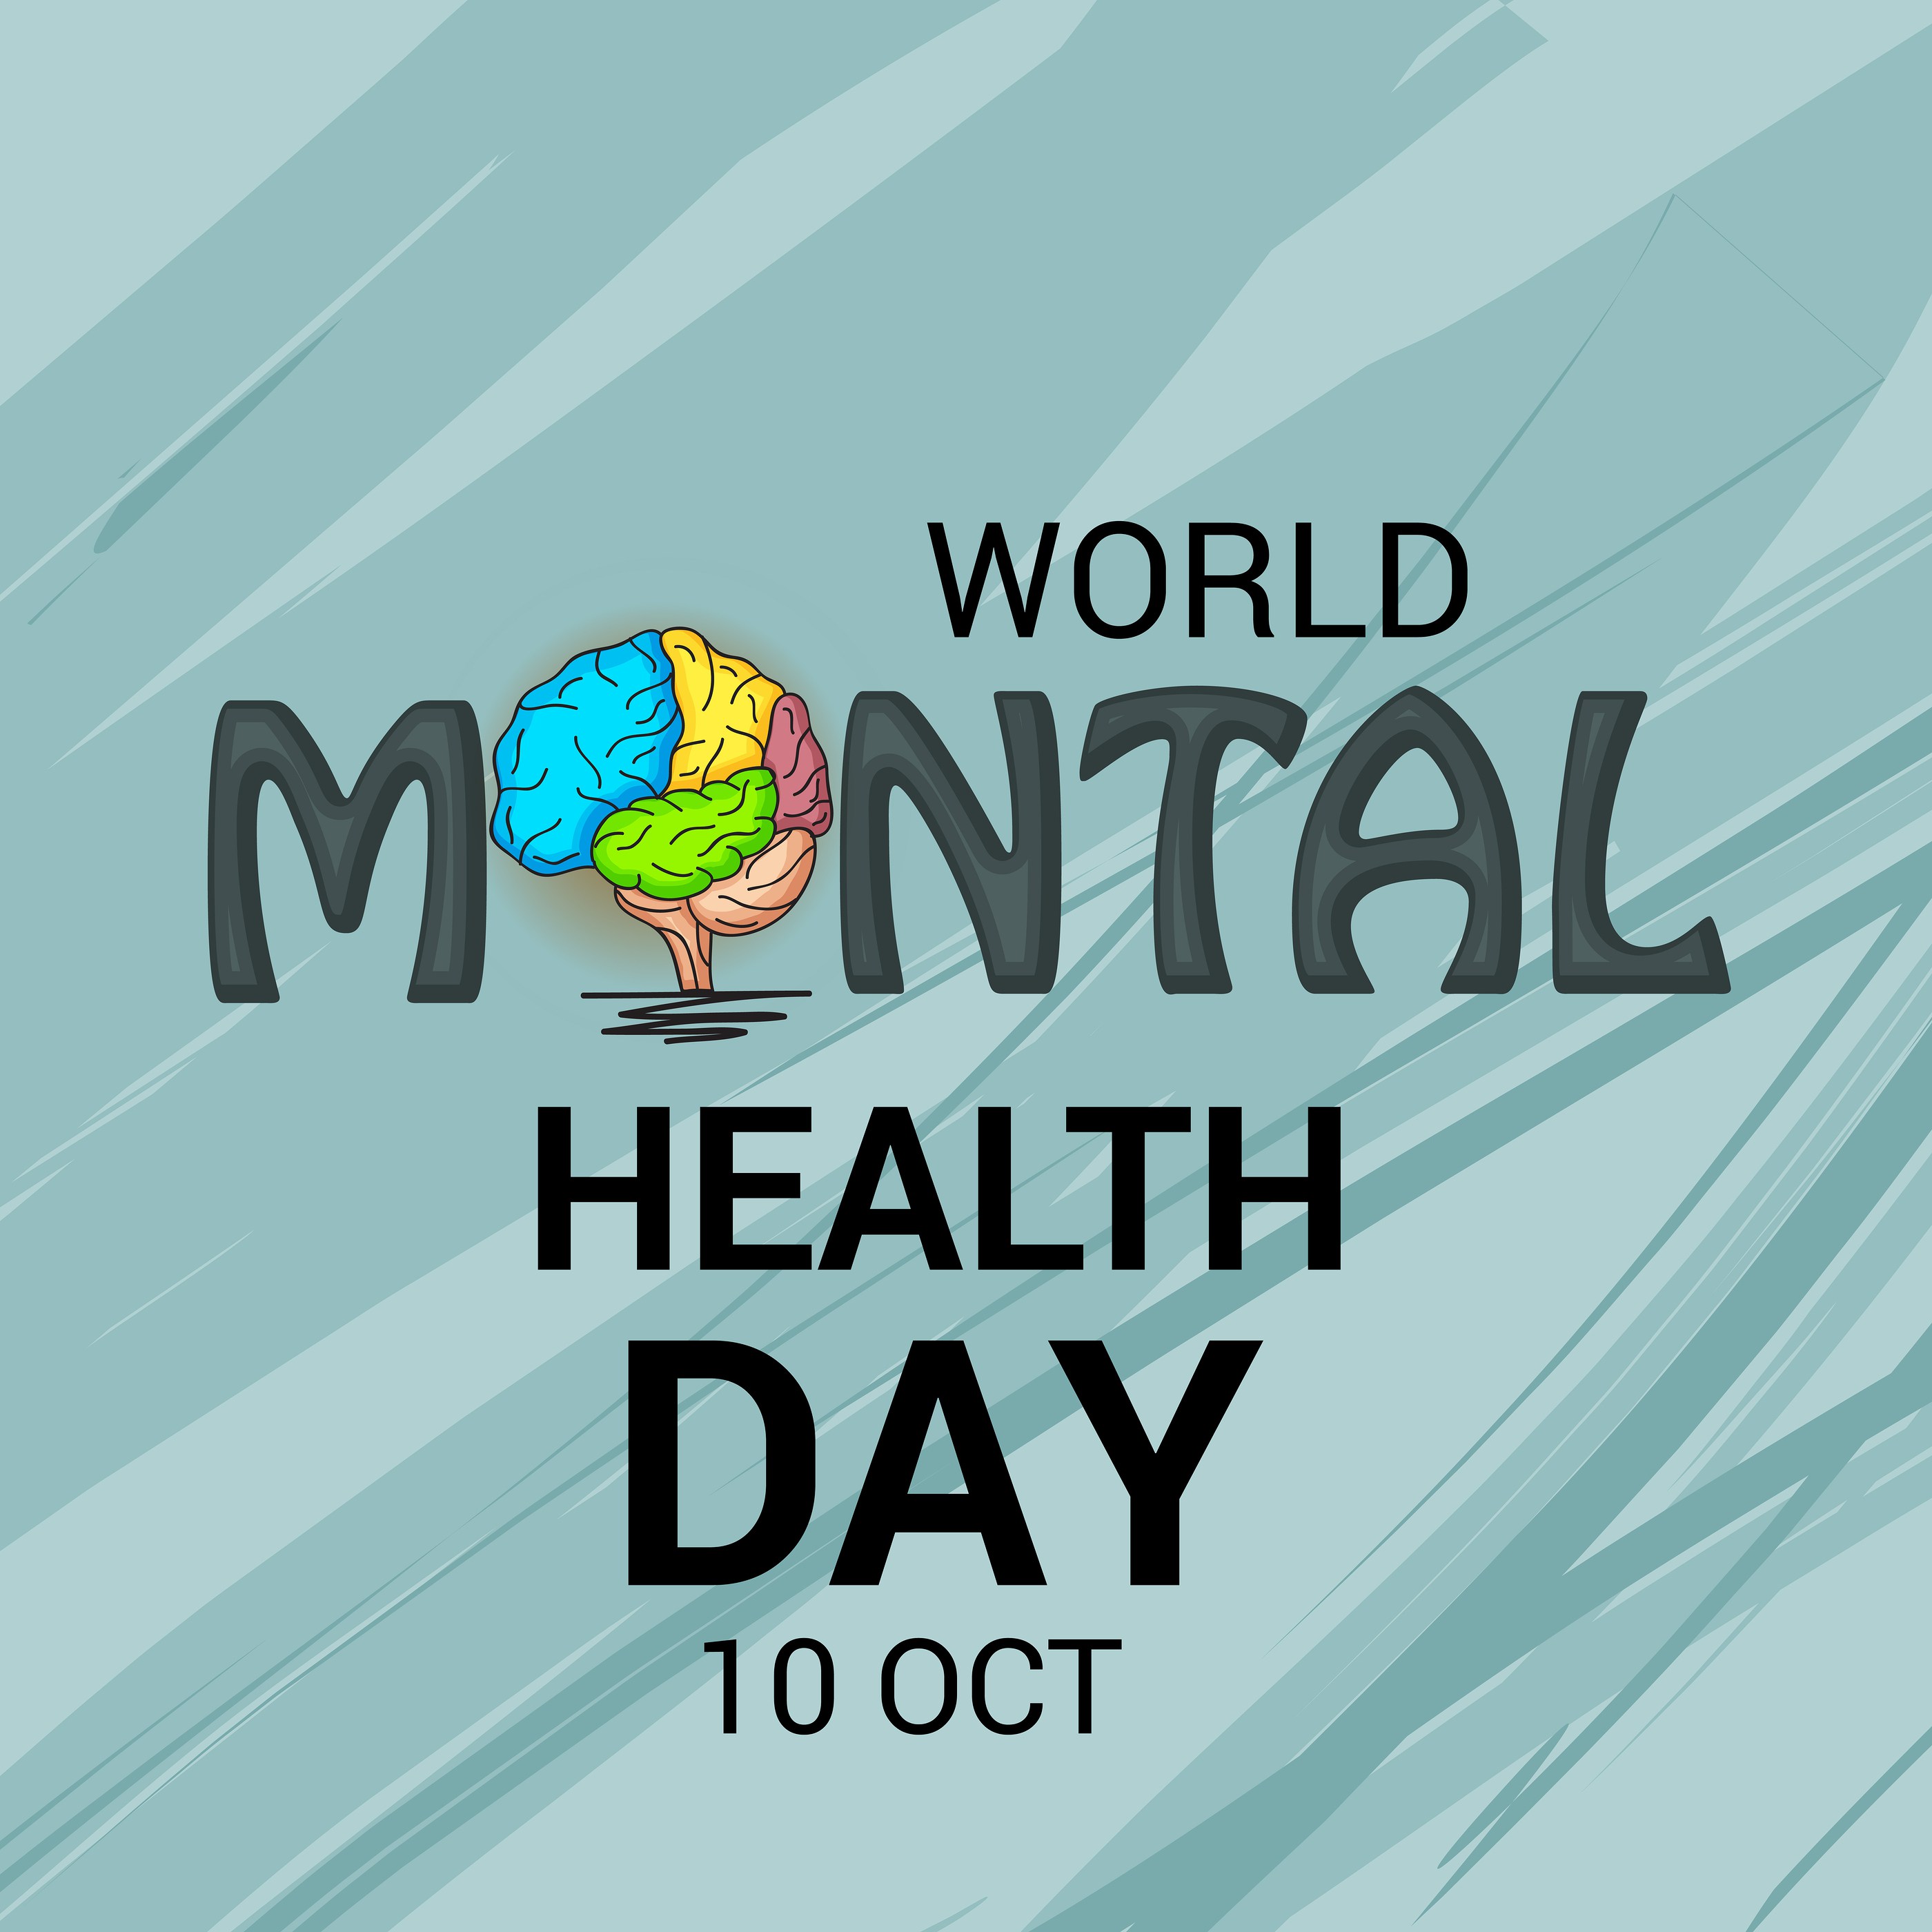 World Mental Health Day Images, HD Pictures, UltraHD Wallpapers, 4K